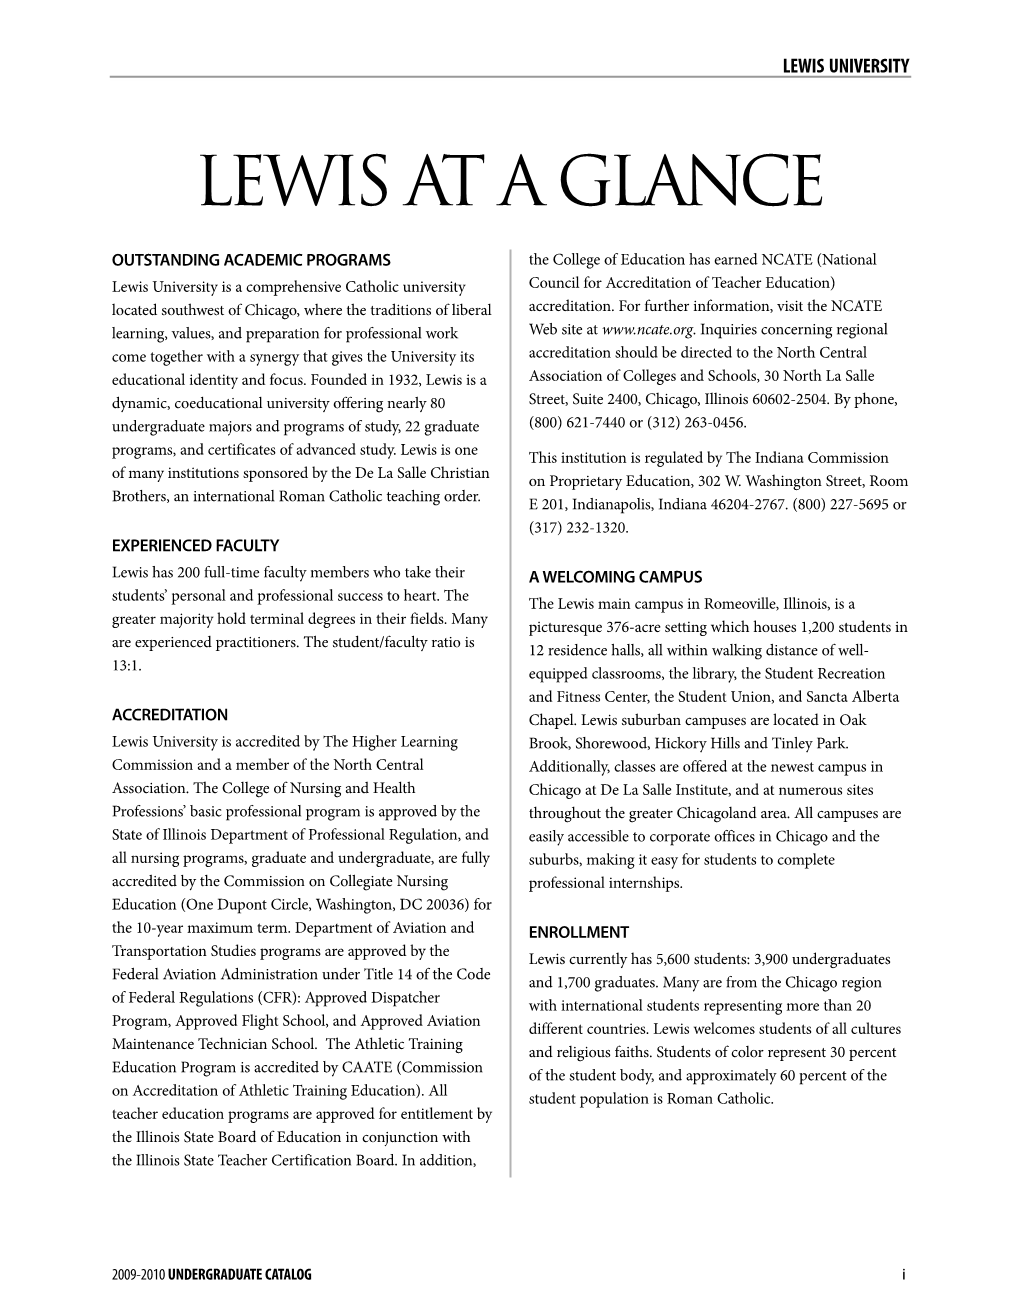 Lewis at a Glance